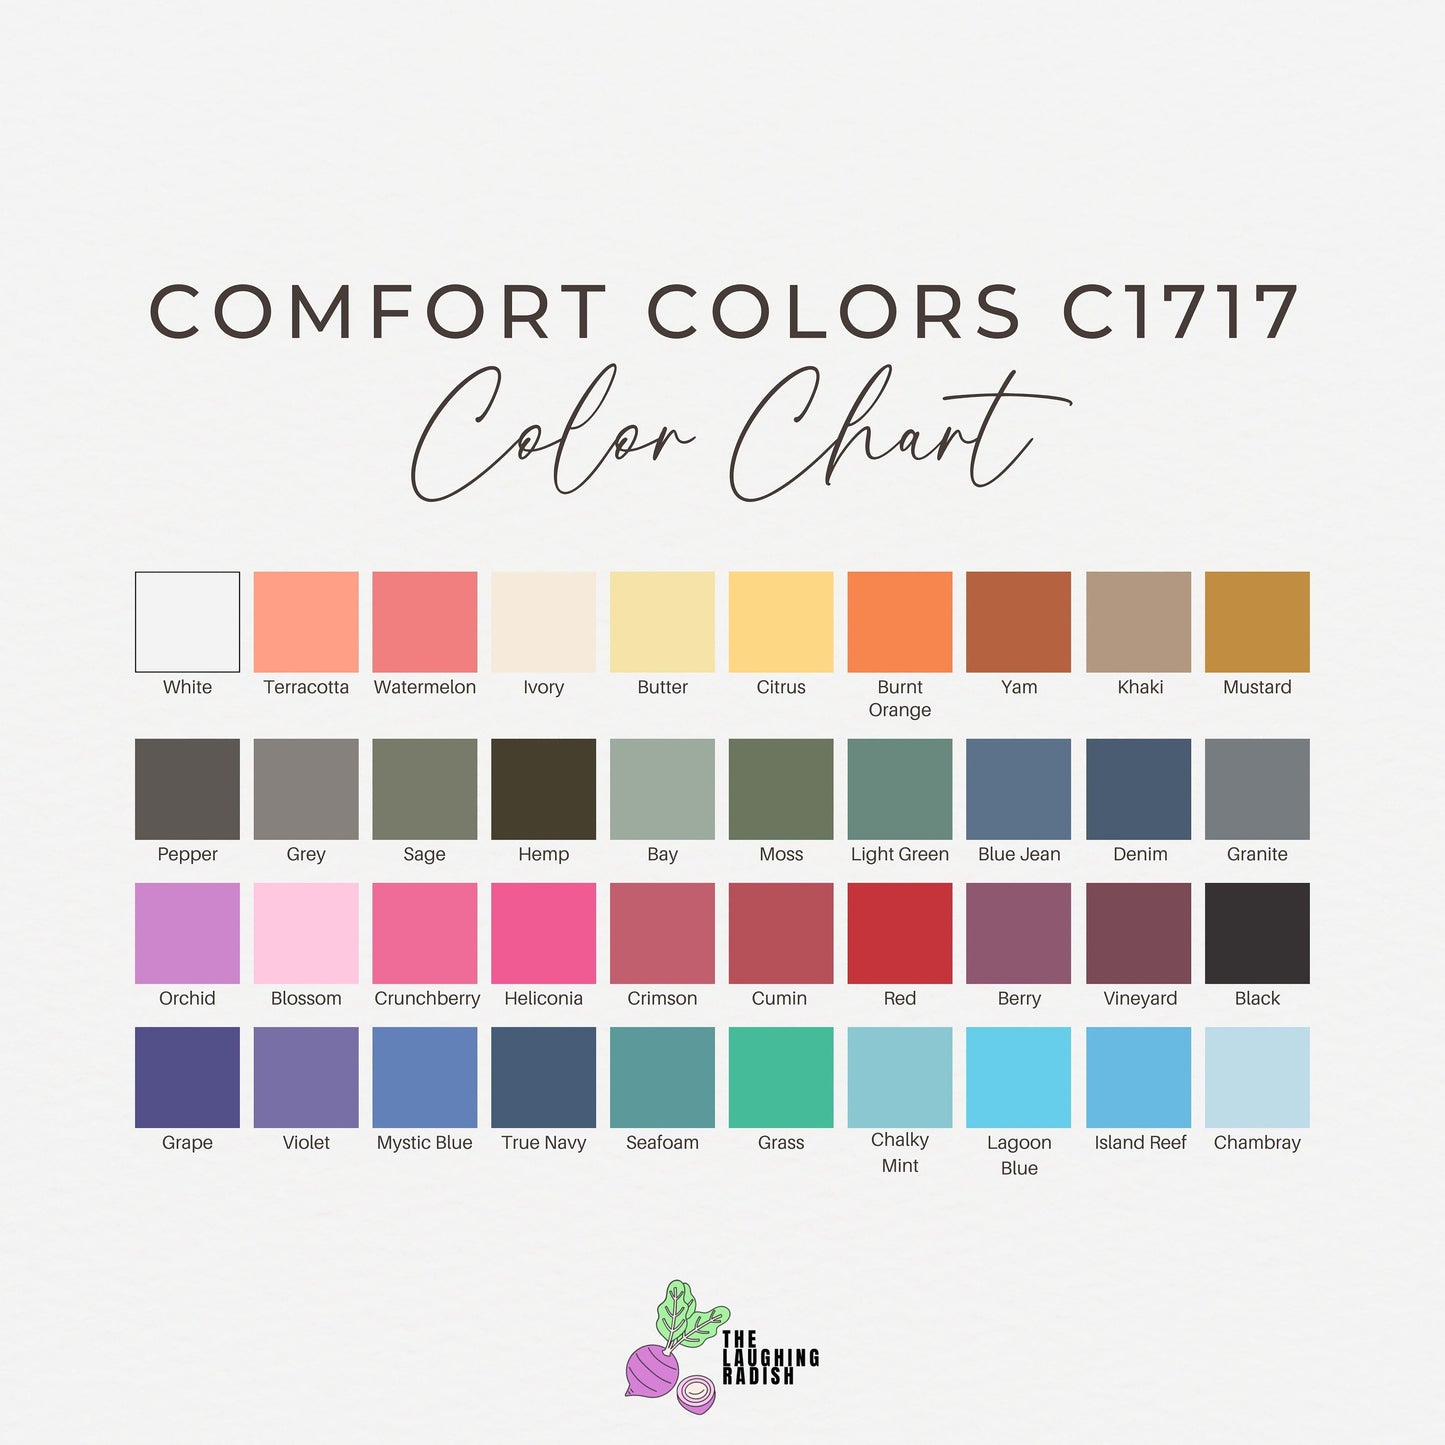 A color guide matching colors with shirt text options including mustard, pepper, bay, seafoam, crunchberry, and crimson.